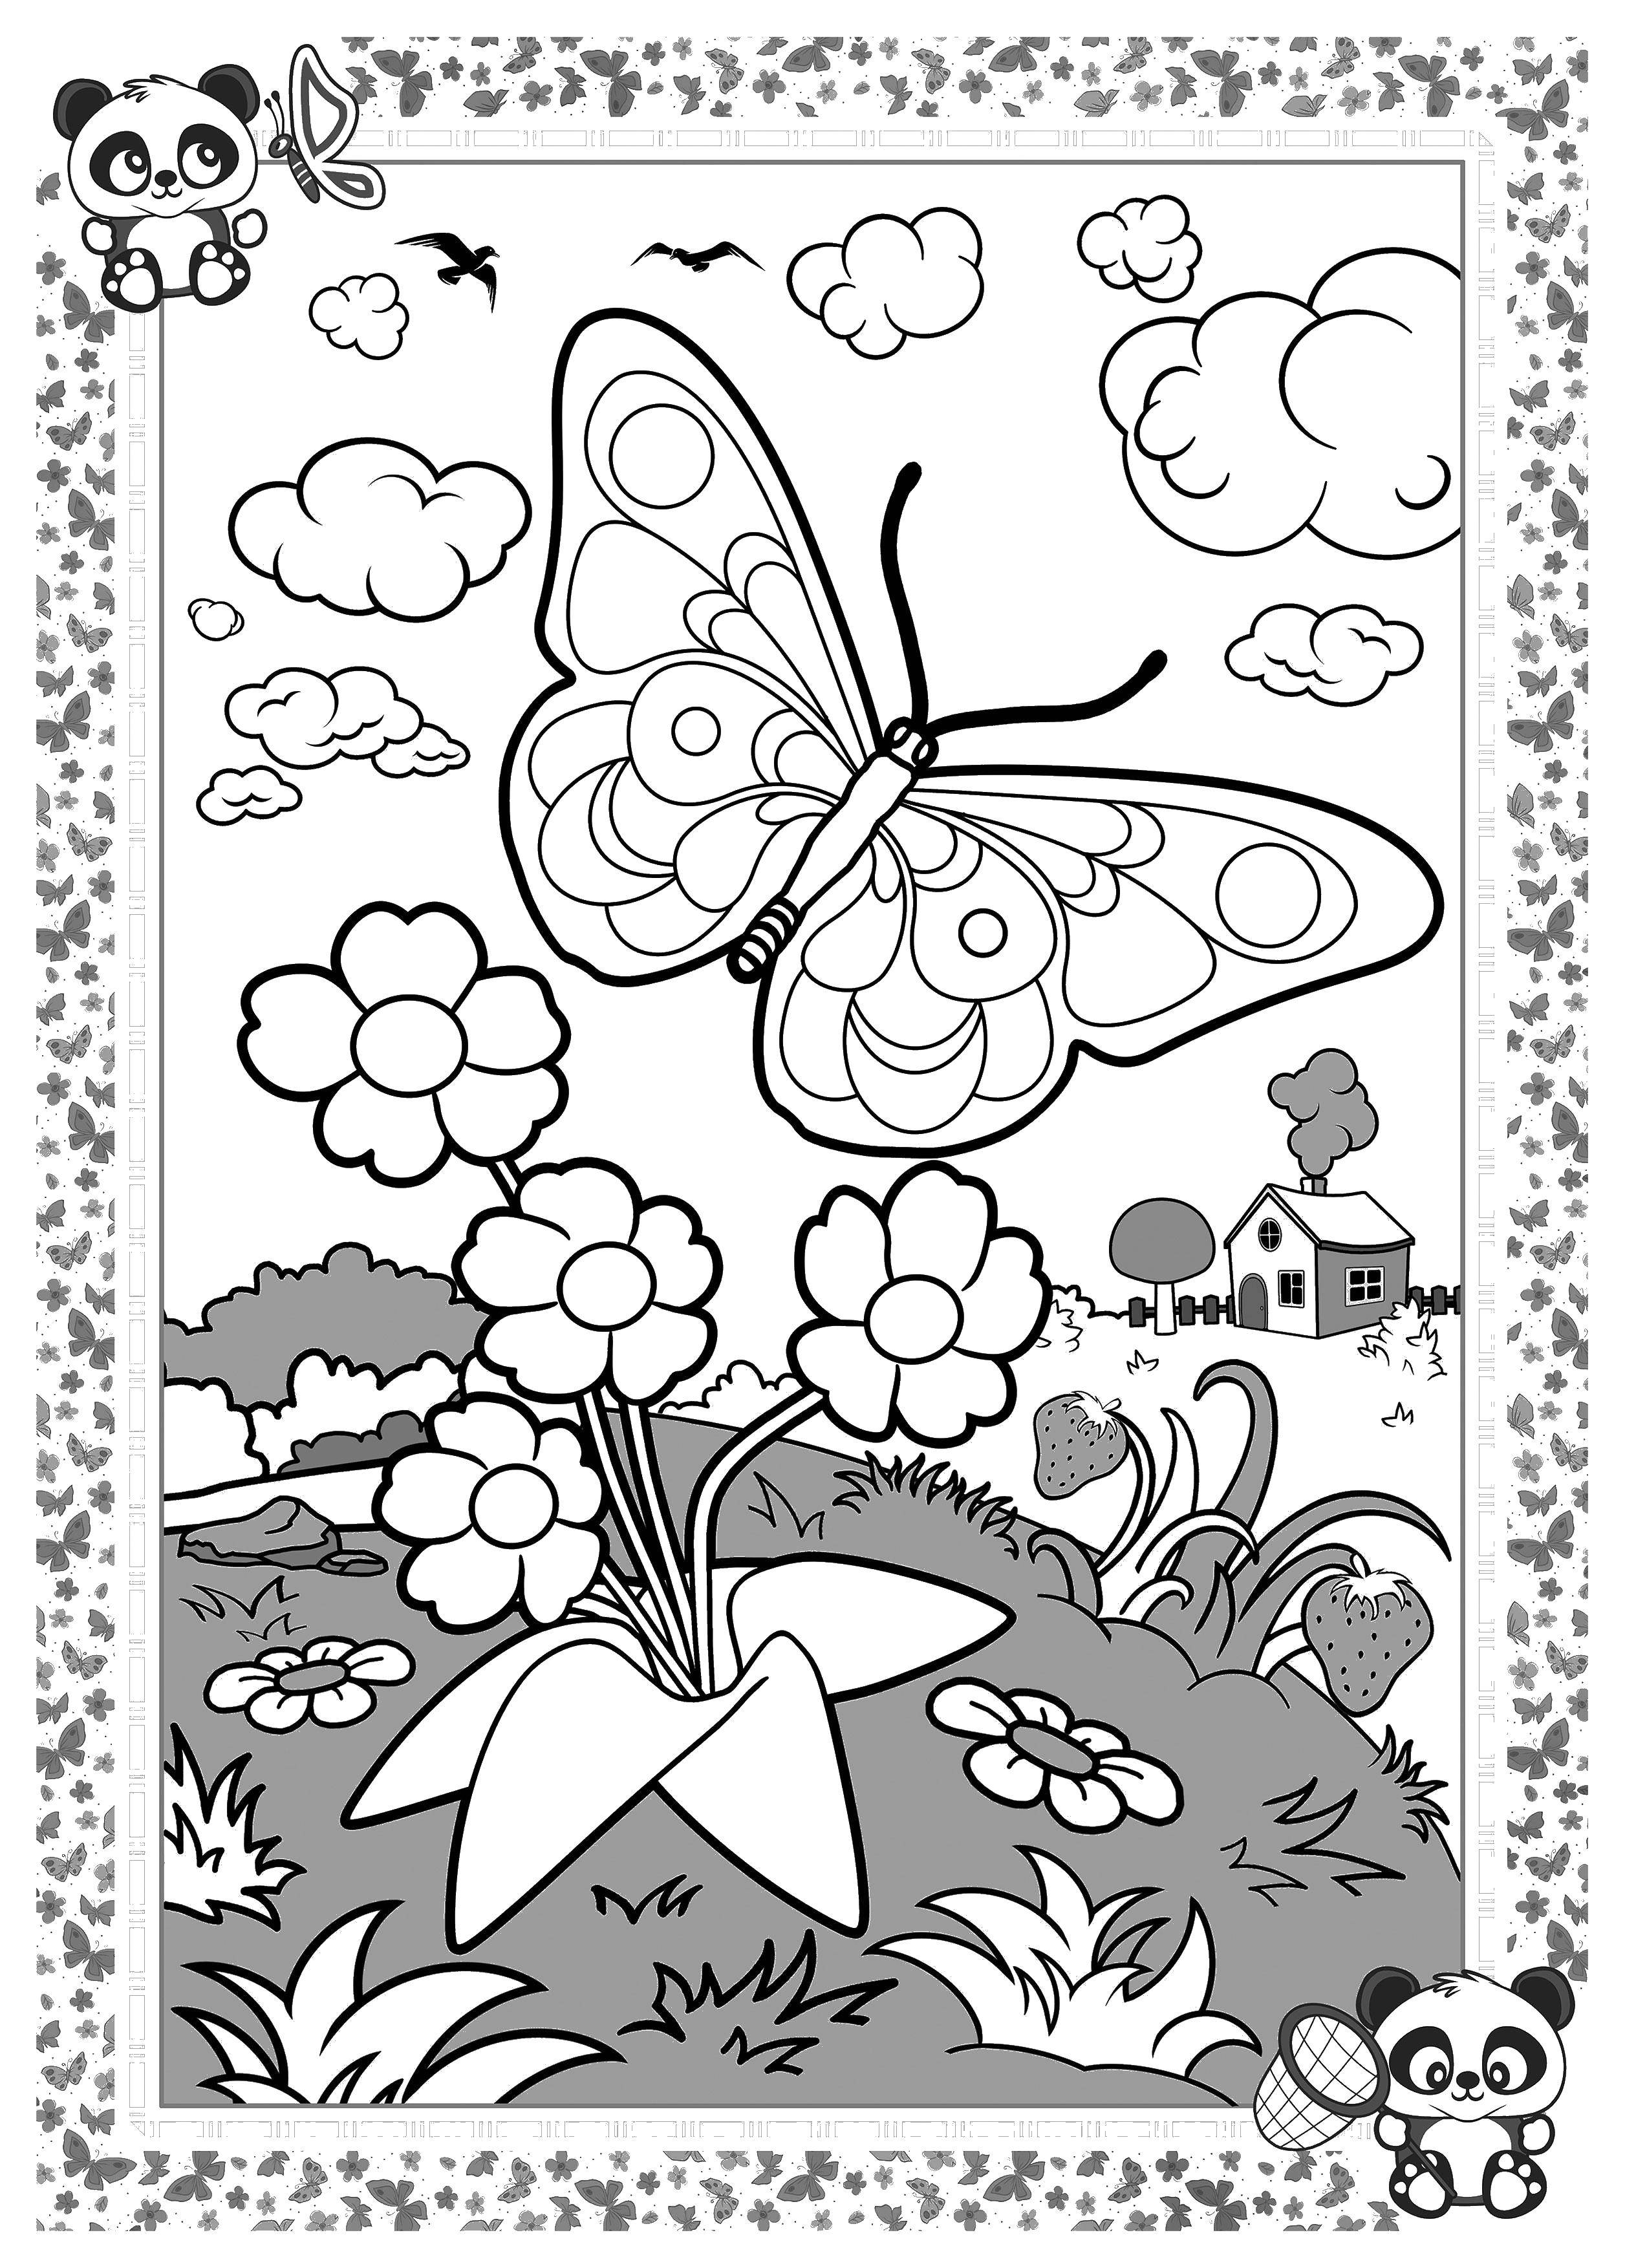 Coloring Butterfly near flowers. Category the notebook. Tags:  butterfly, flowers, grass.